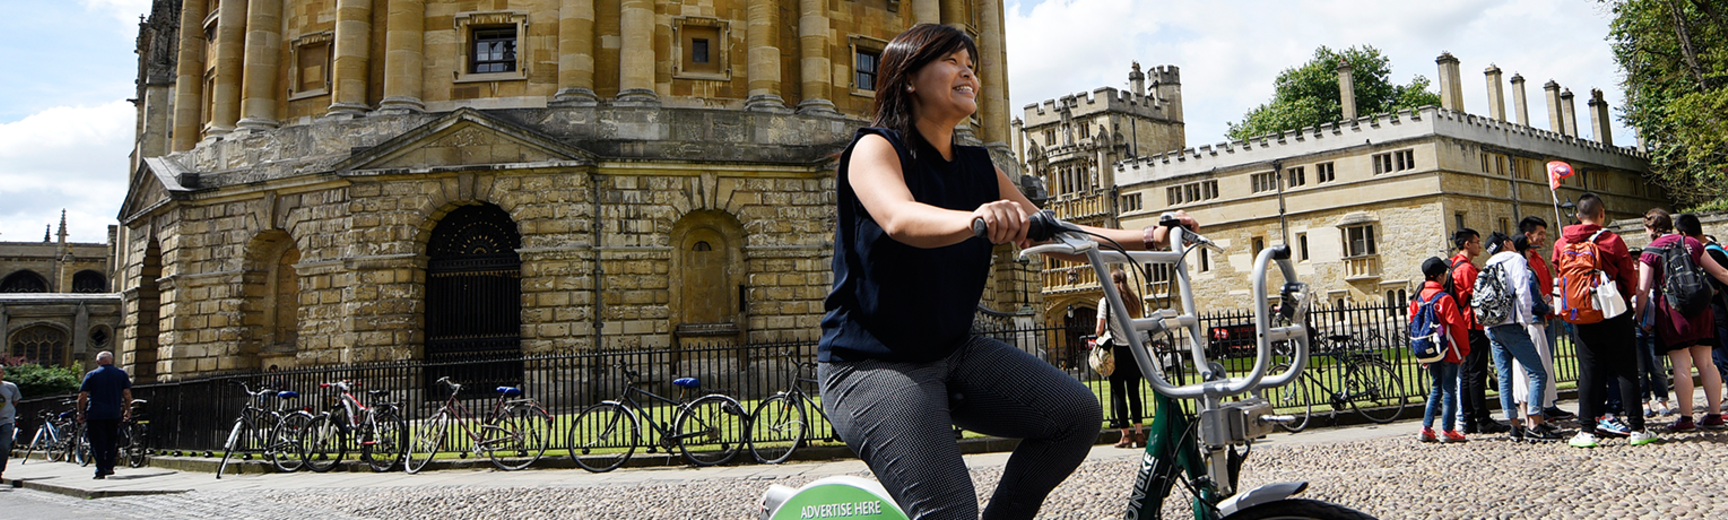 Image of cyclist riding around the Radcliffe camera